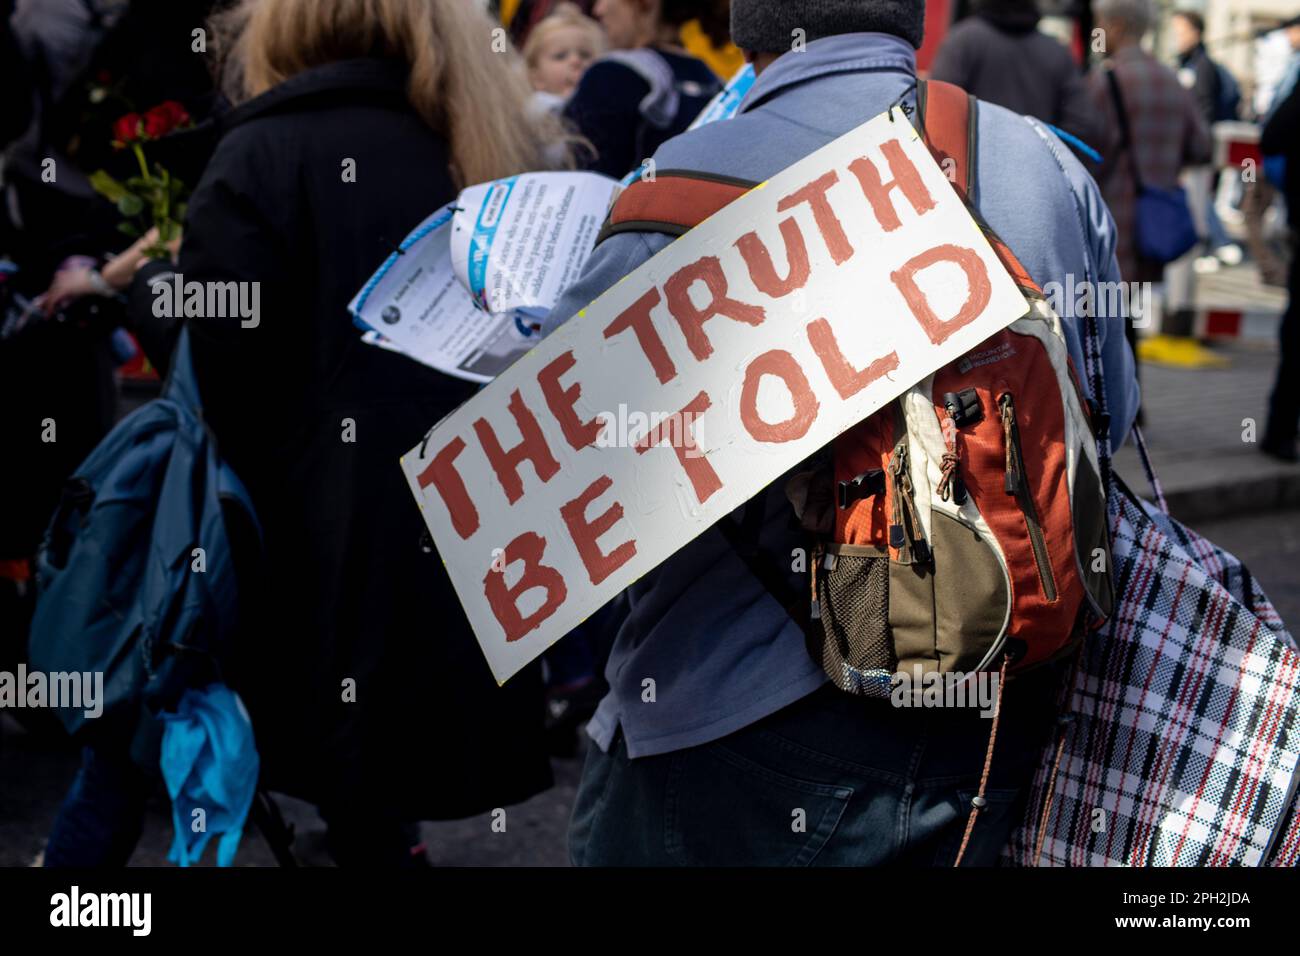 London, UK. 25th Mar, 2023. Hundreds of people marched in Whitehall, claiming that COVID-19 was a hoax perpetuated by big corporations and that vaccines should not be mandatory. They also demanded justice and called for individuals like Matt Hancock to be held accountable in court. Credit: Sinai Noor/Alamy Live News Stock Photo